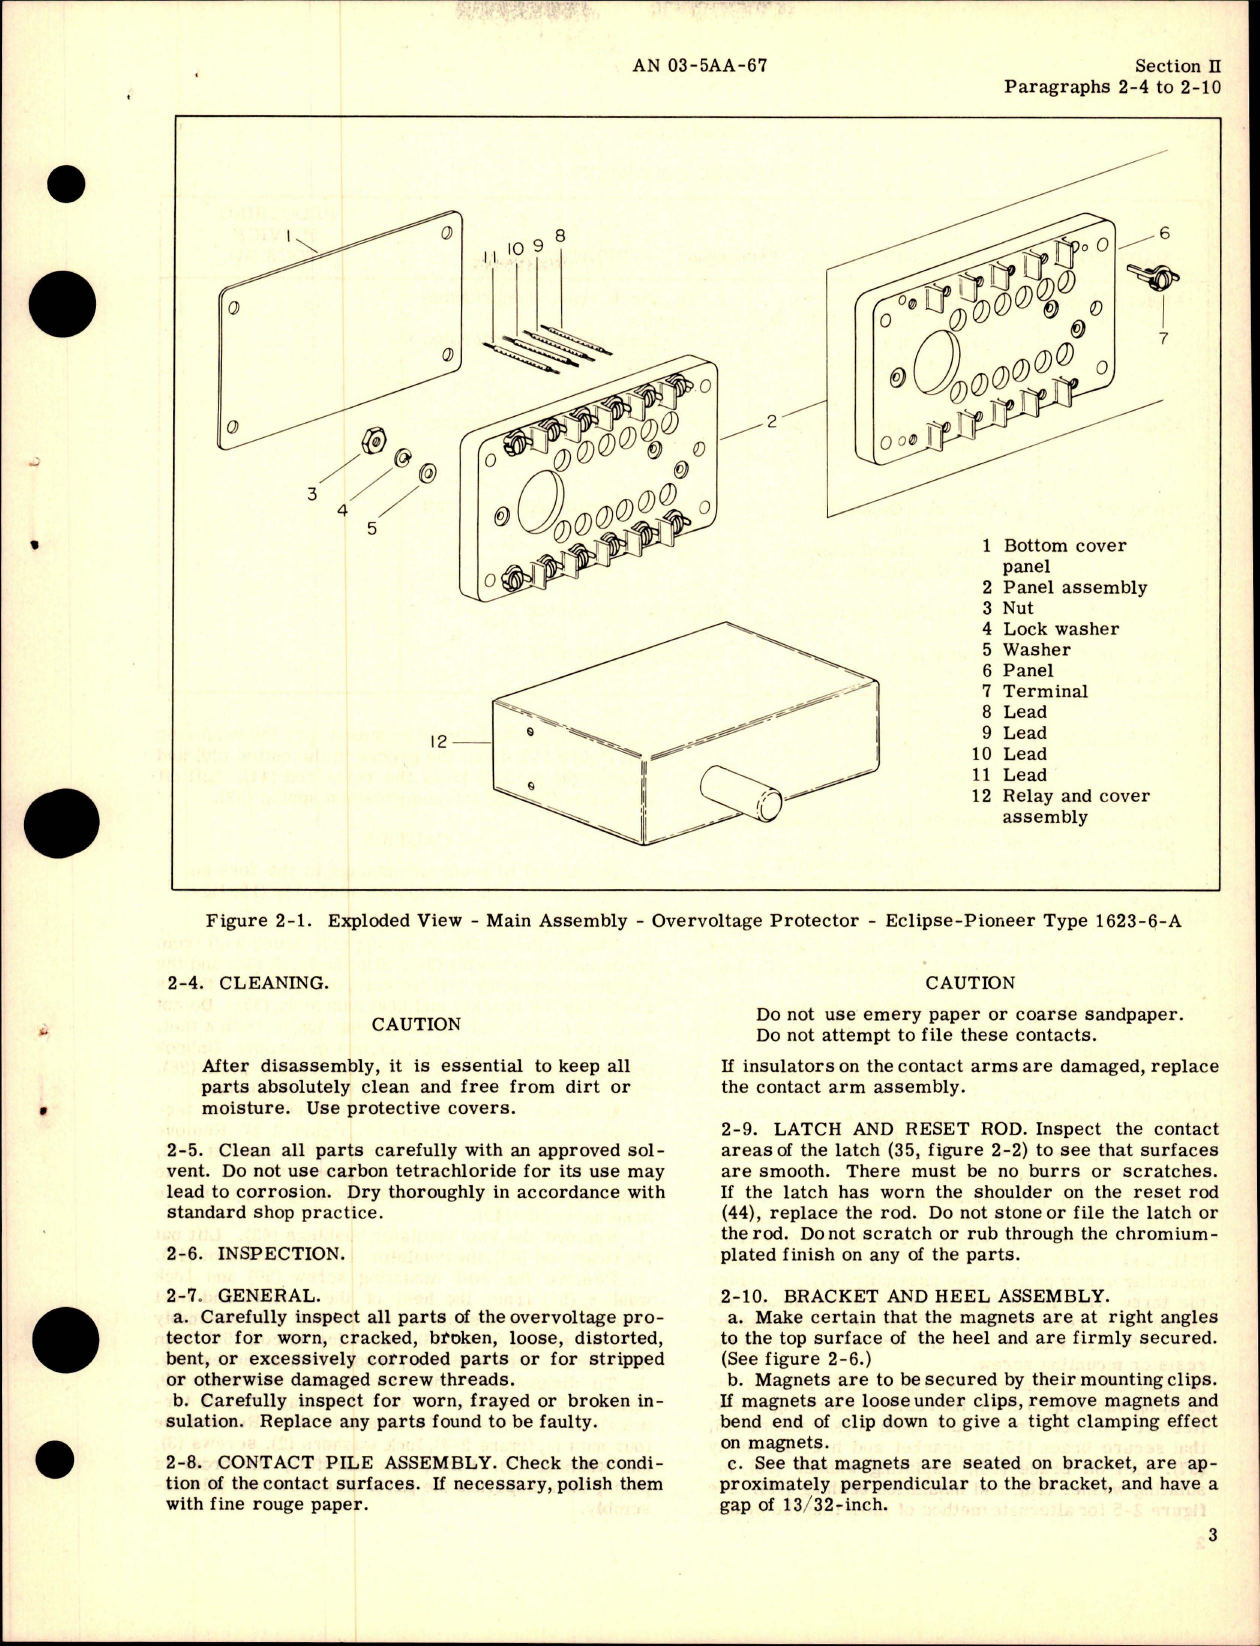 Sample page 7 from AirCorps Library document: Overhaul Instructions for Overvoltage Protector - Navy Stock R86EC-1623-6-A, Part 1623-6-A 